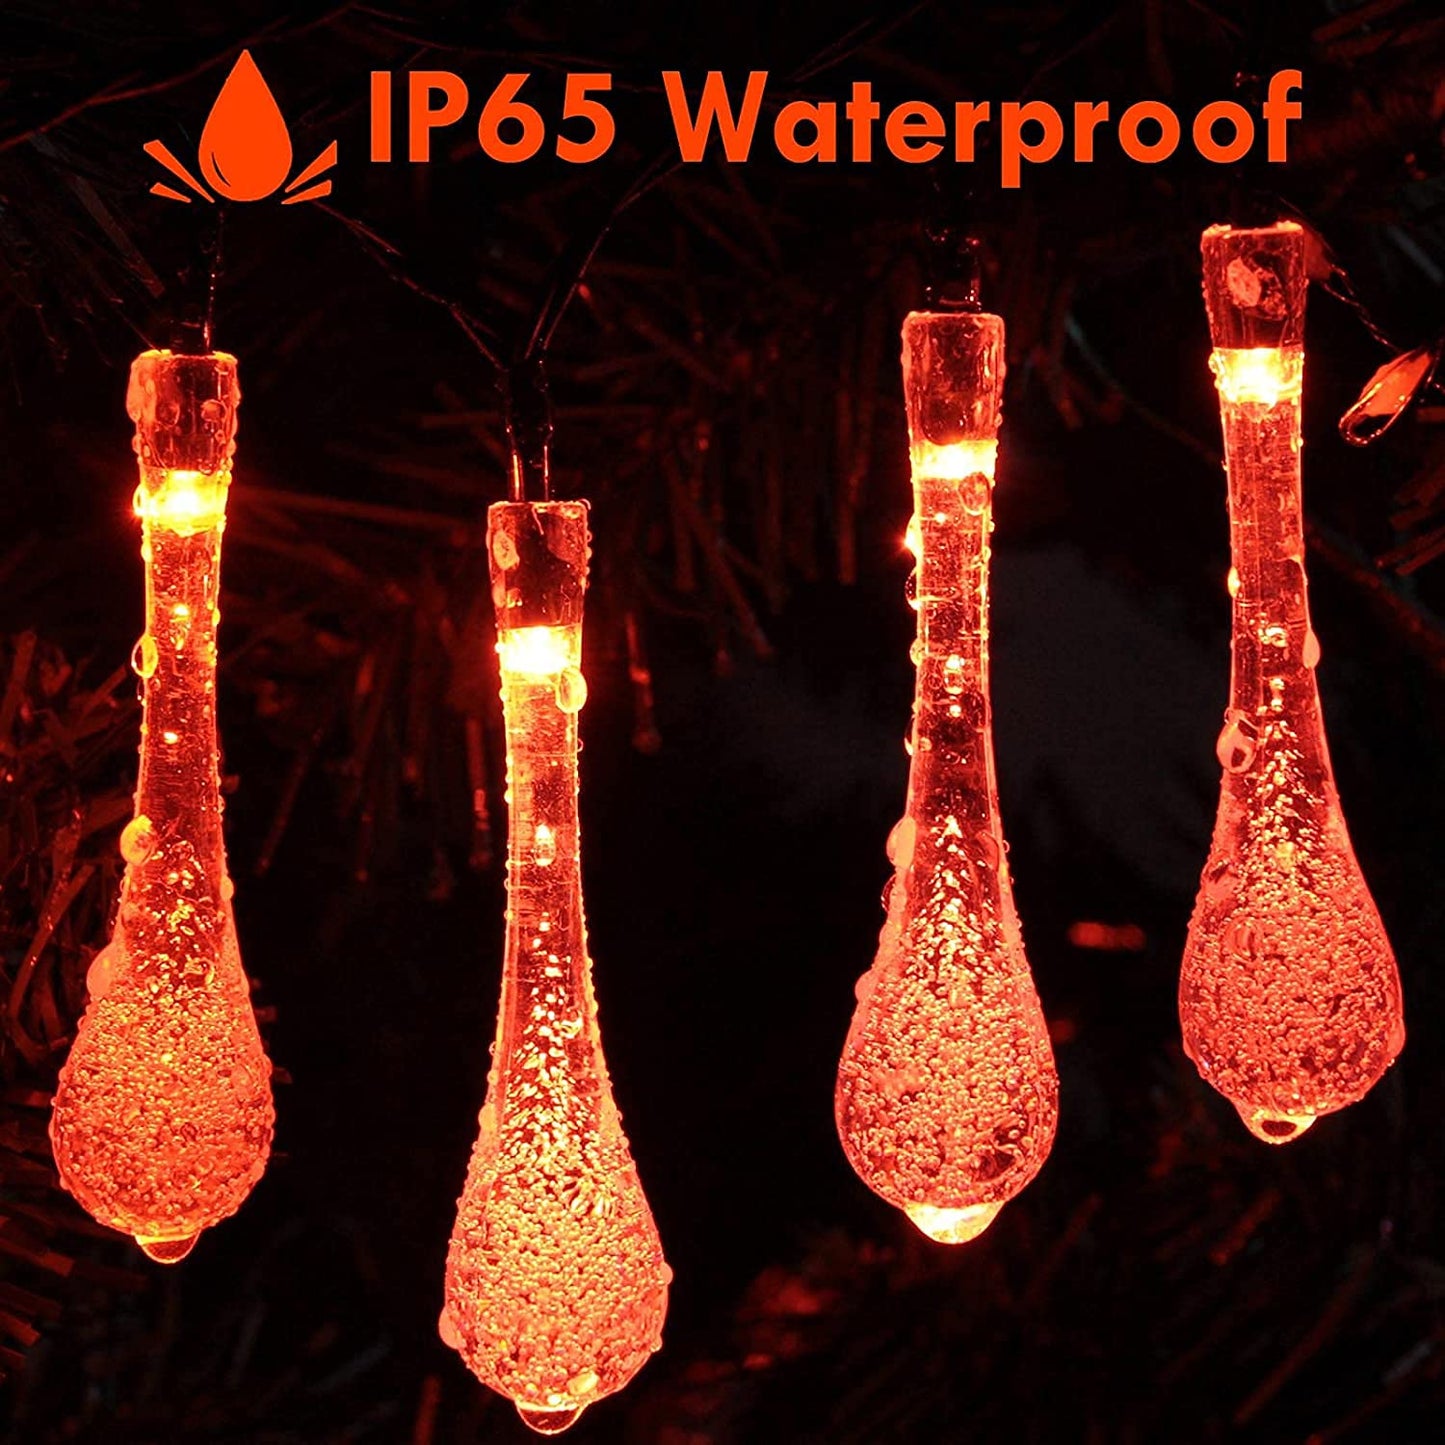 Crystal Waterdrop Shape LED String Light 18 Bulb 8 Meter long for Home Decoration (Red)